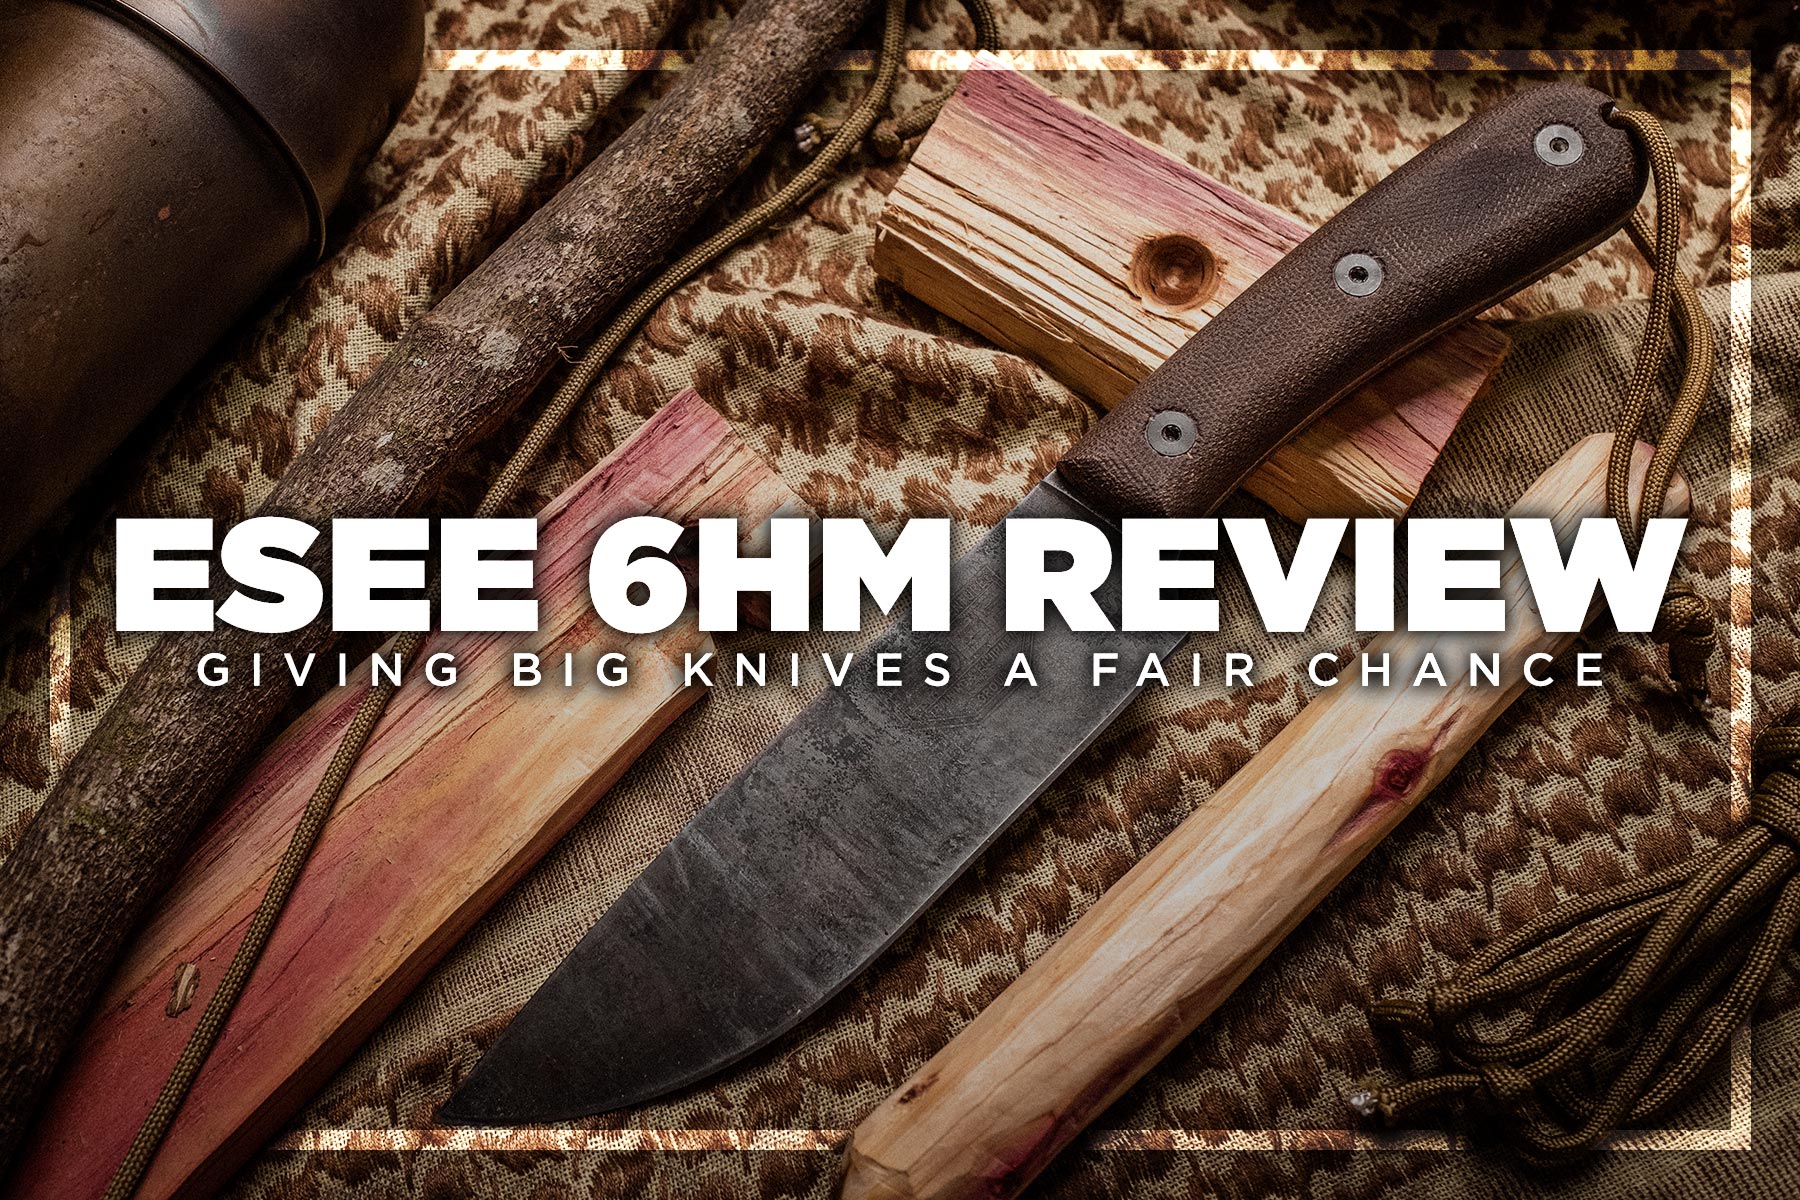 Esee Knife Comparison: Which One Deserves Your Money?